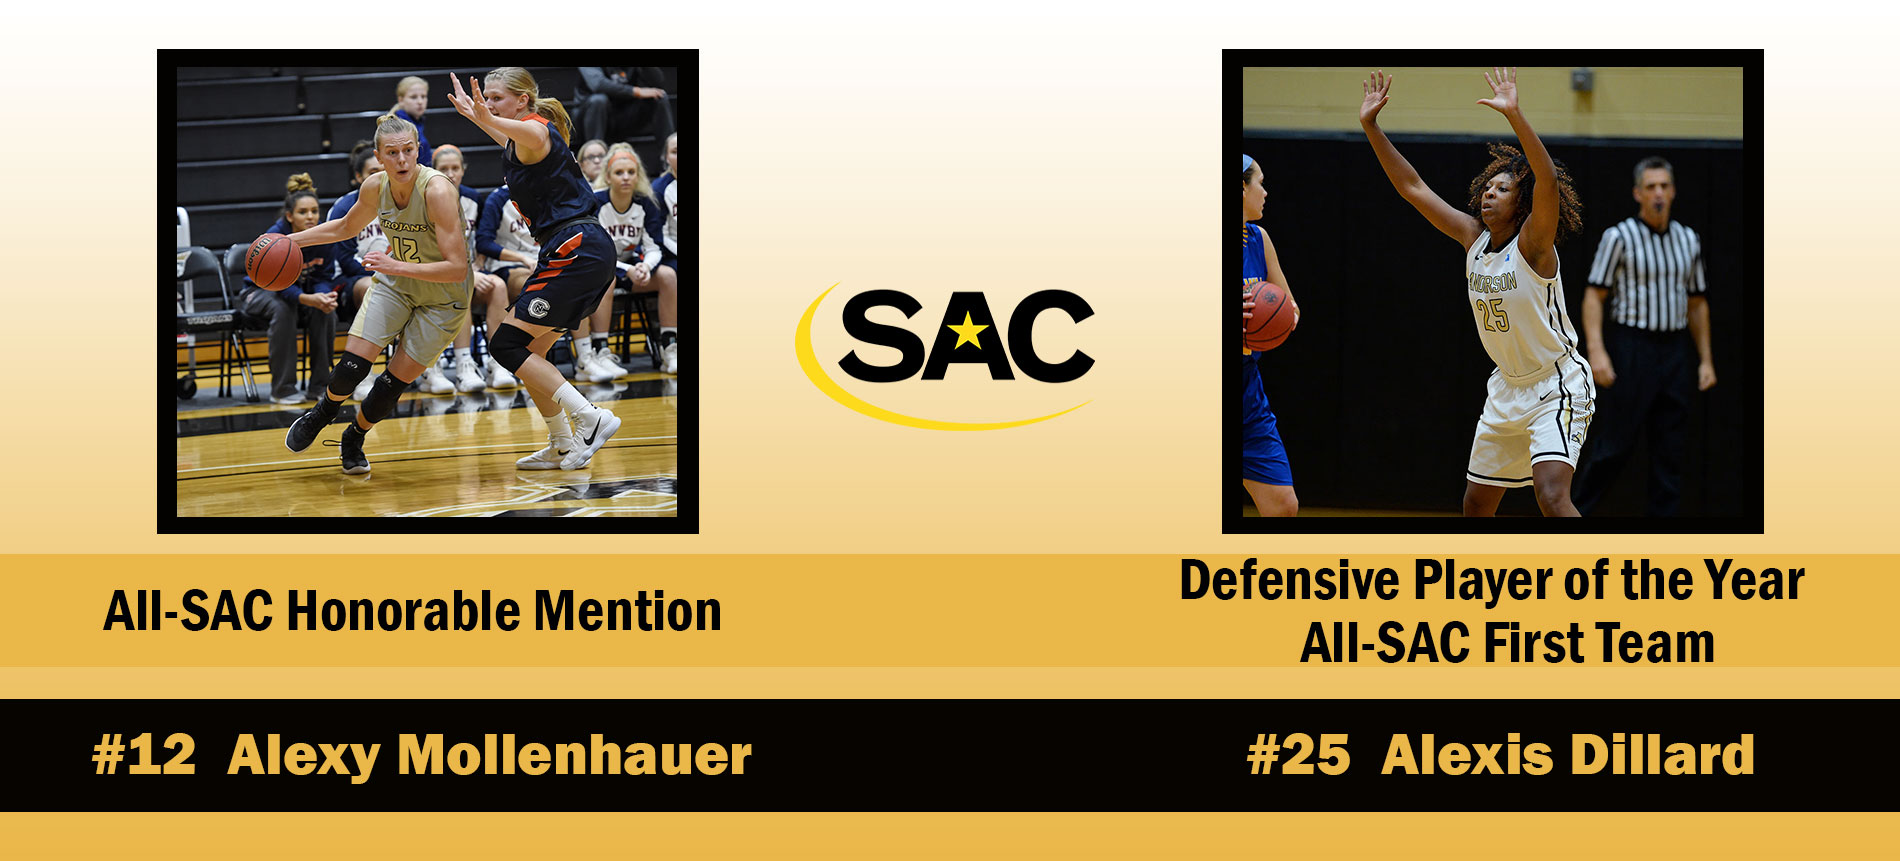 Dillard Named SAC Defensive Player of the Year, Mollenhauer Earns All-SAC Honors